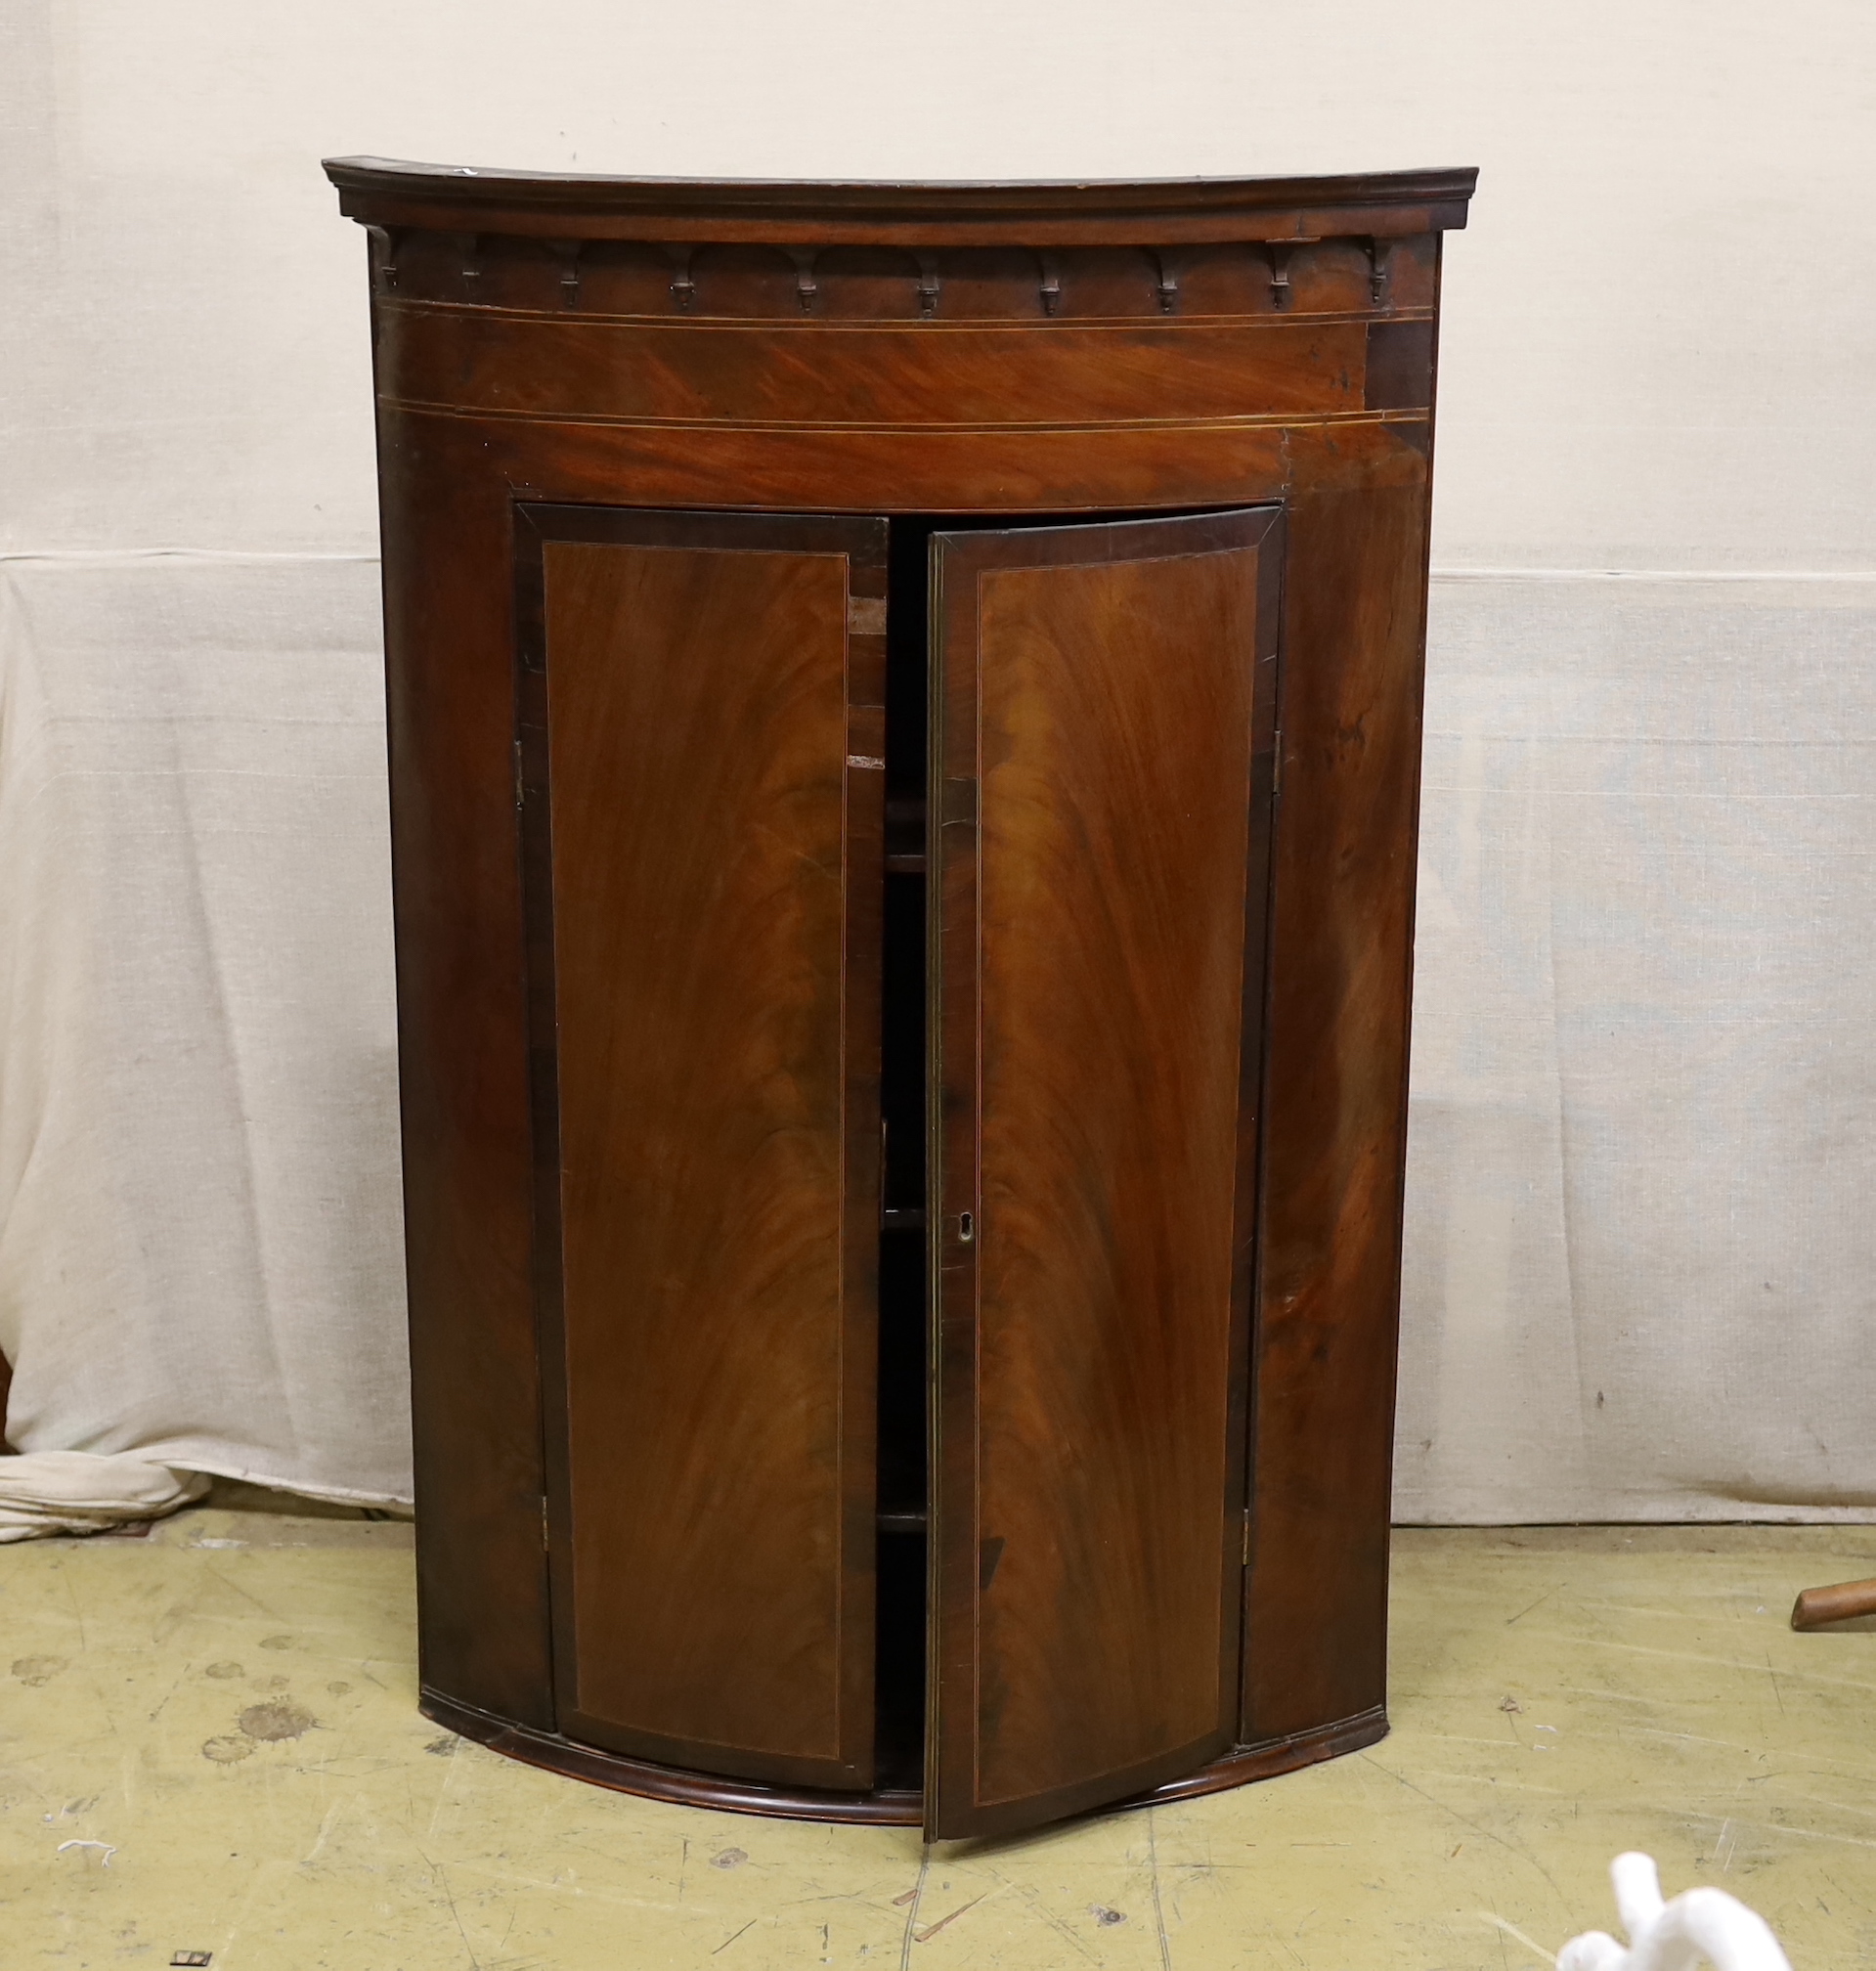 A 19th century George III bow-fronted hanging mahogany corner cupboard, width 84cm, depth 59cm, height 125cm